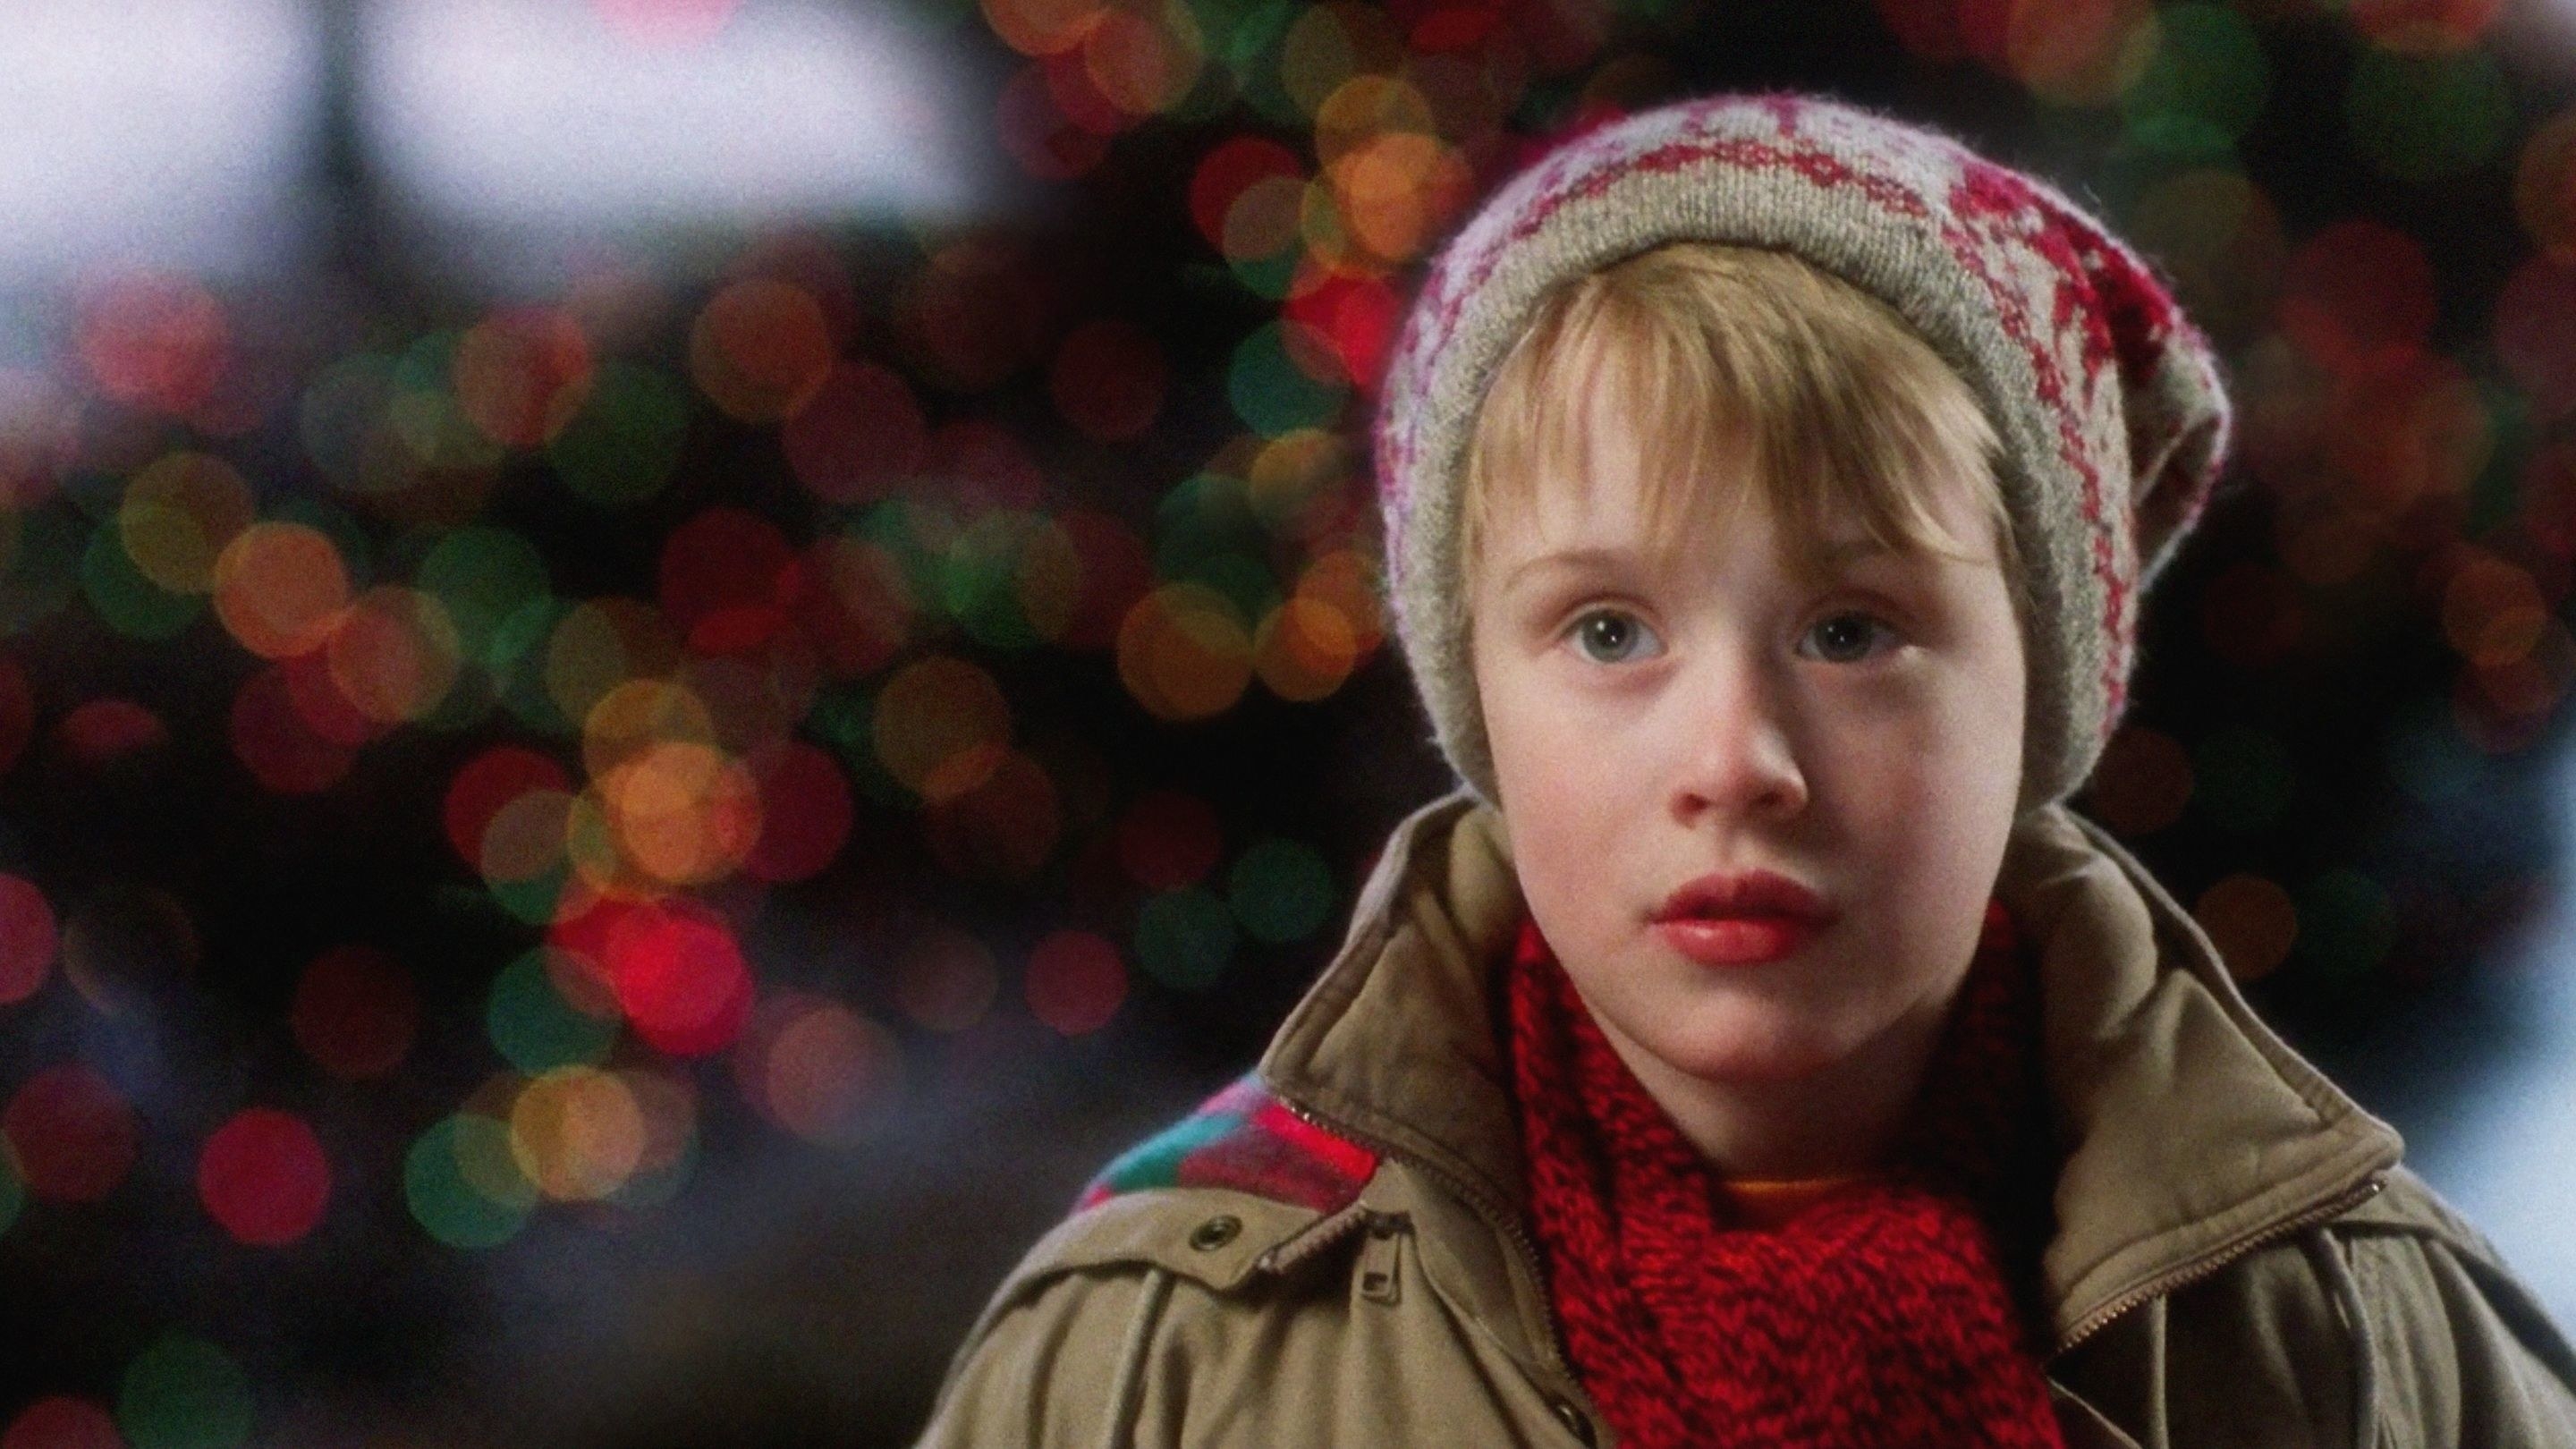 A shot from the movie Home Alone, with Macaulay Culkin dressed in a red scarf, brown jacket and a red winter hat.